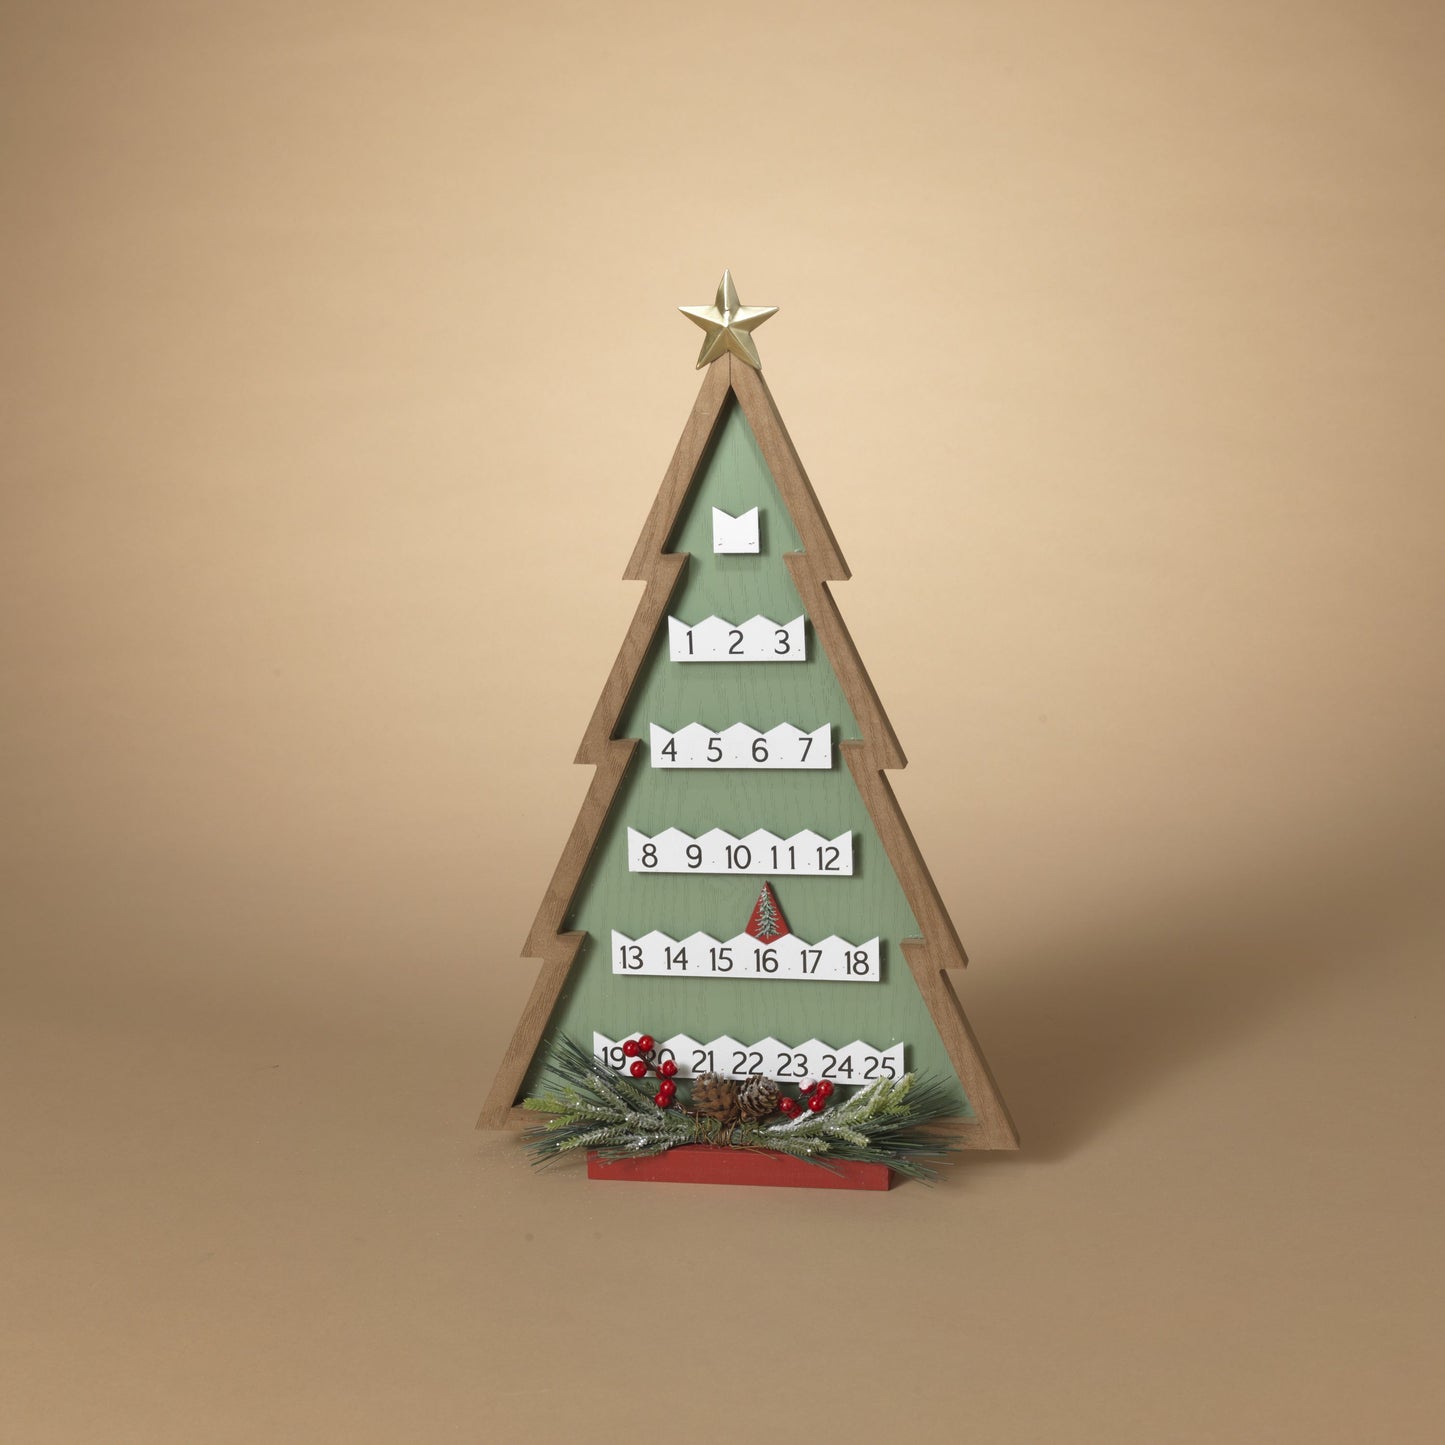 Gerson Company 19.6"H Wood Christmas Tree Countdown Calendar W/ Floral Accent